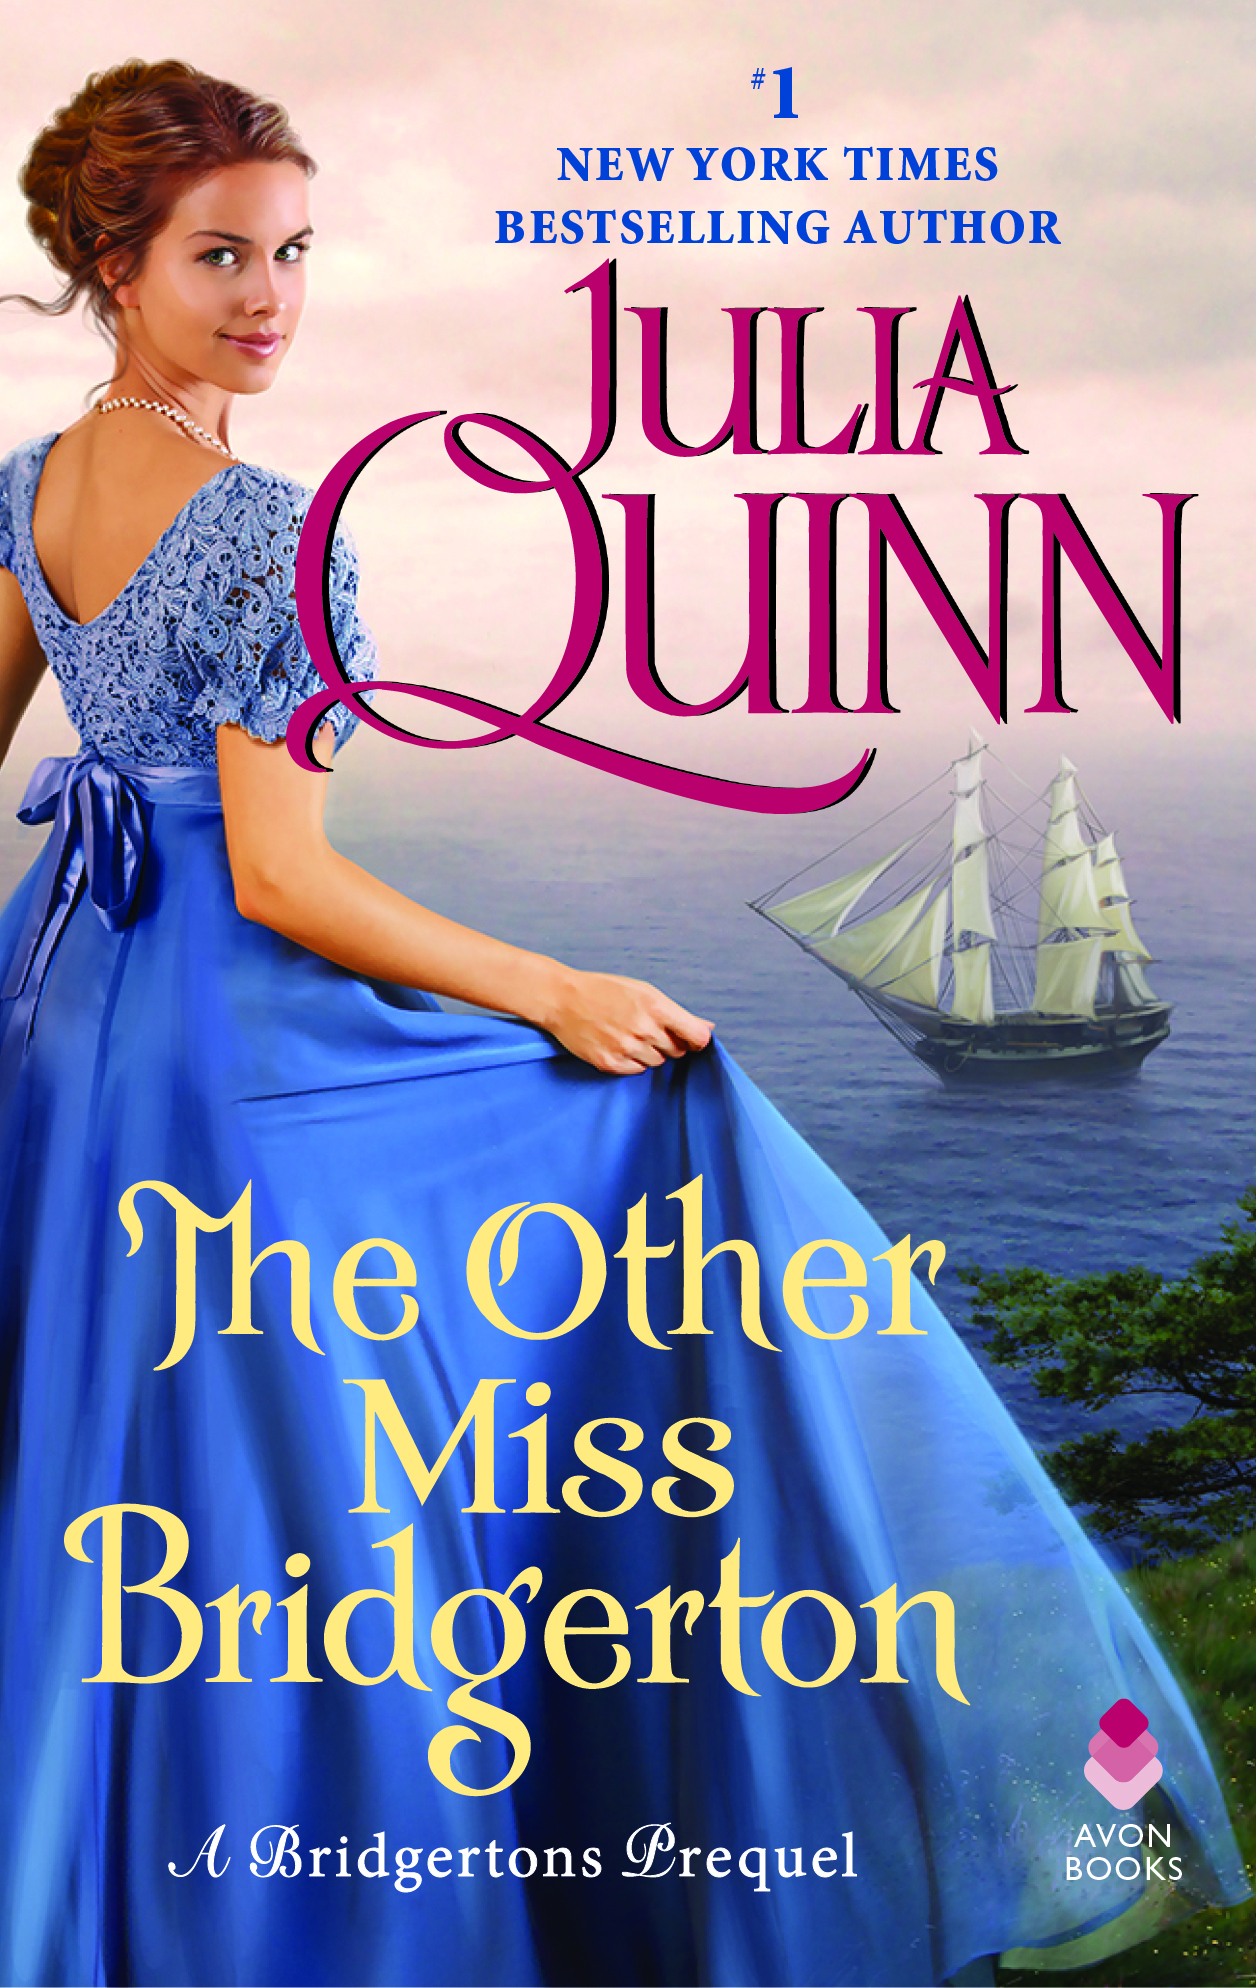 The Other Miss Bridgerton Book Review